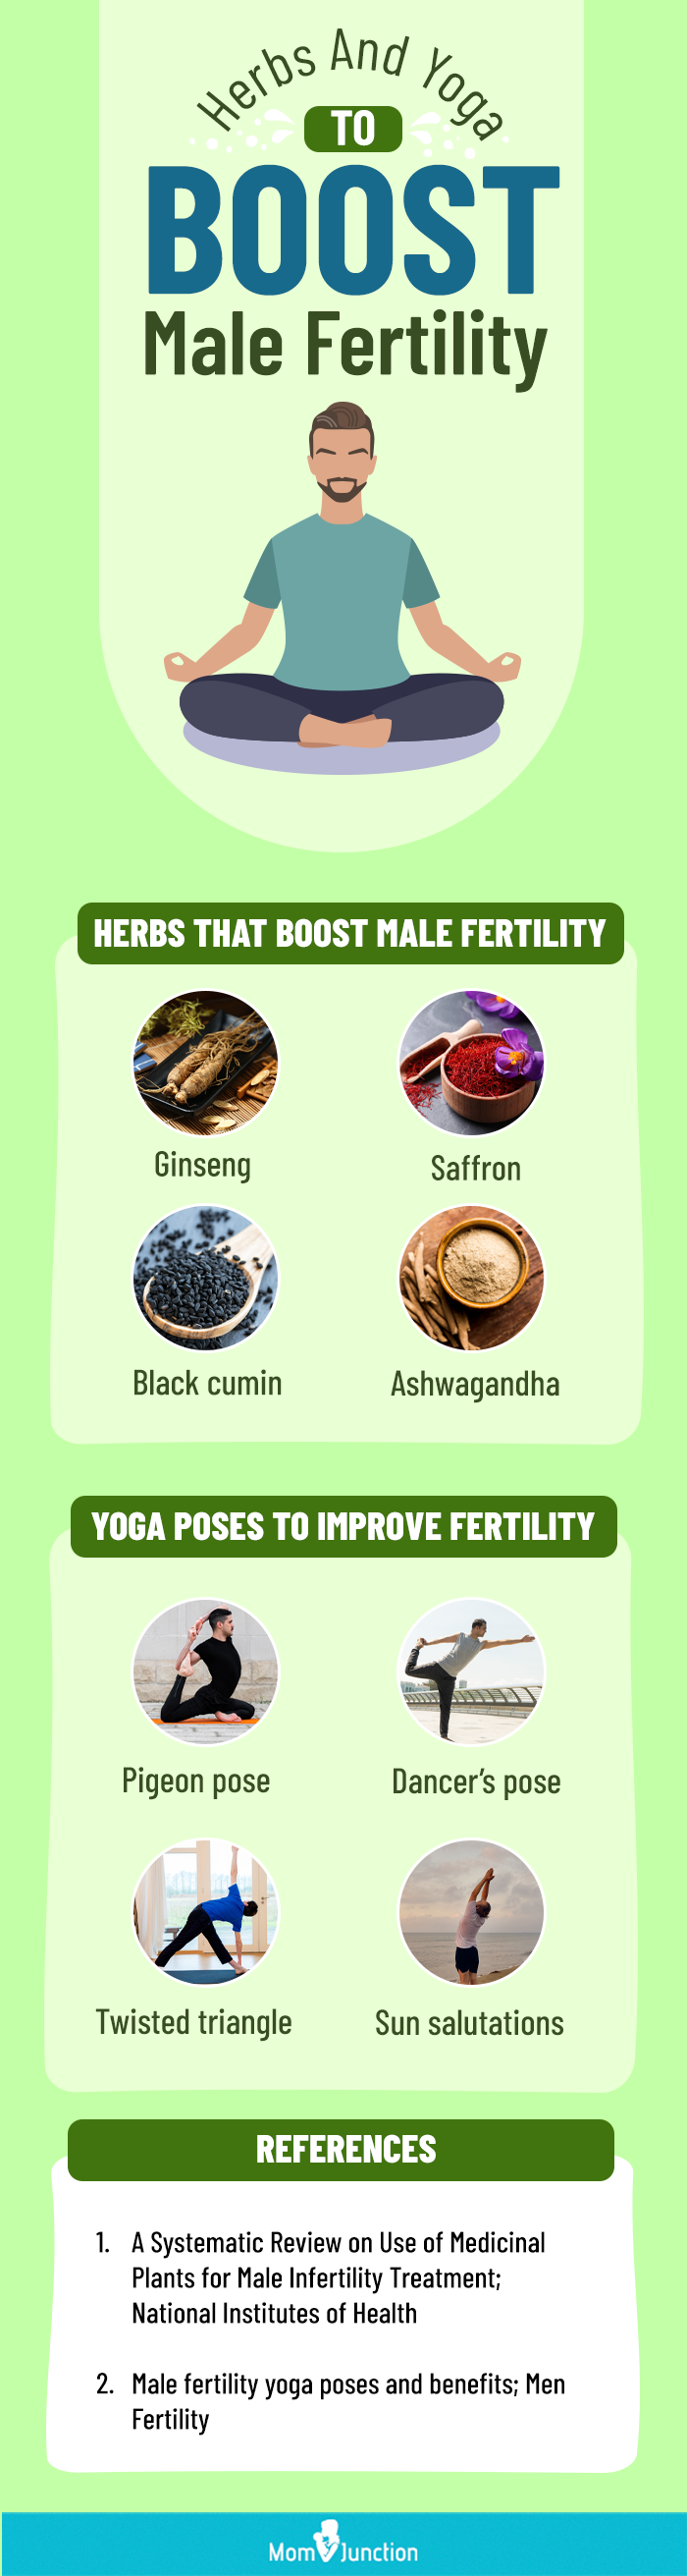 herbs and yoga to boost male fertility (infographic)